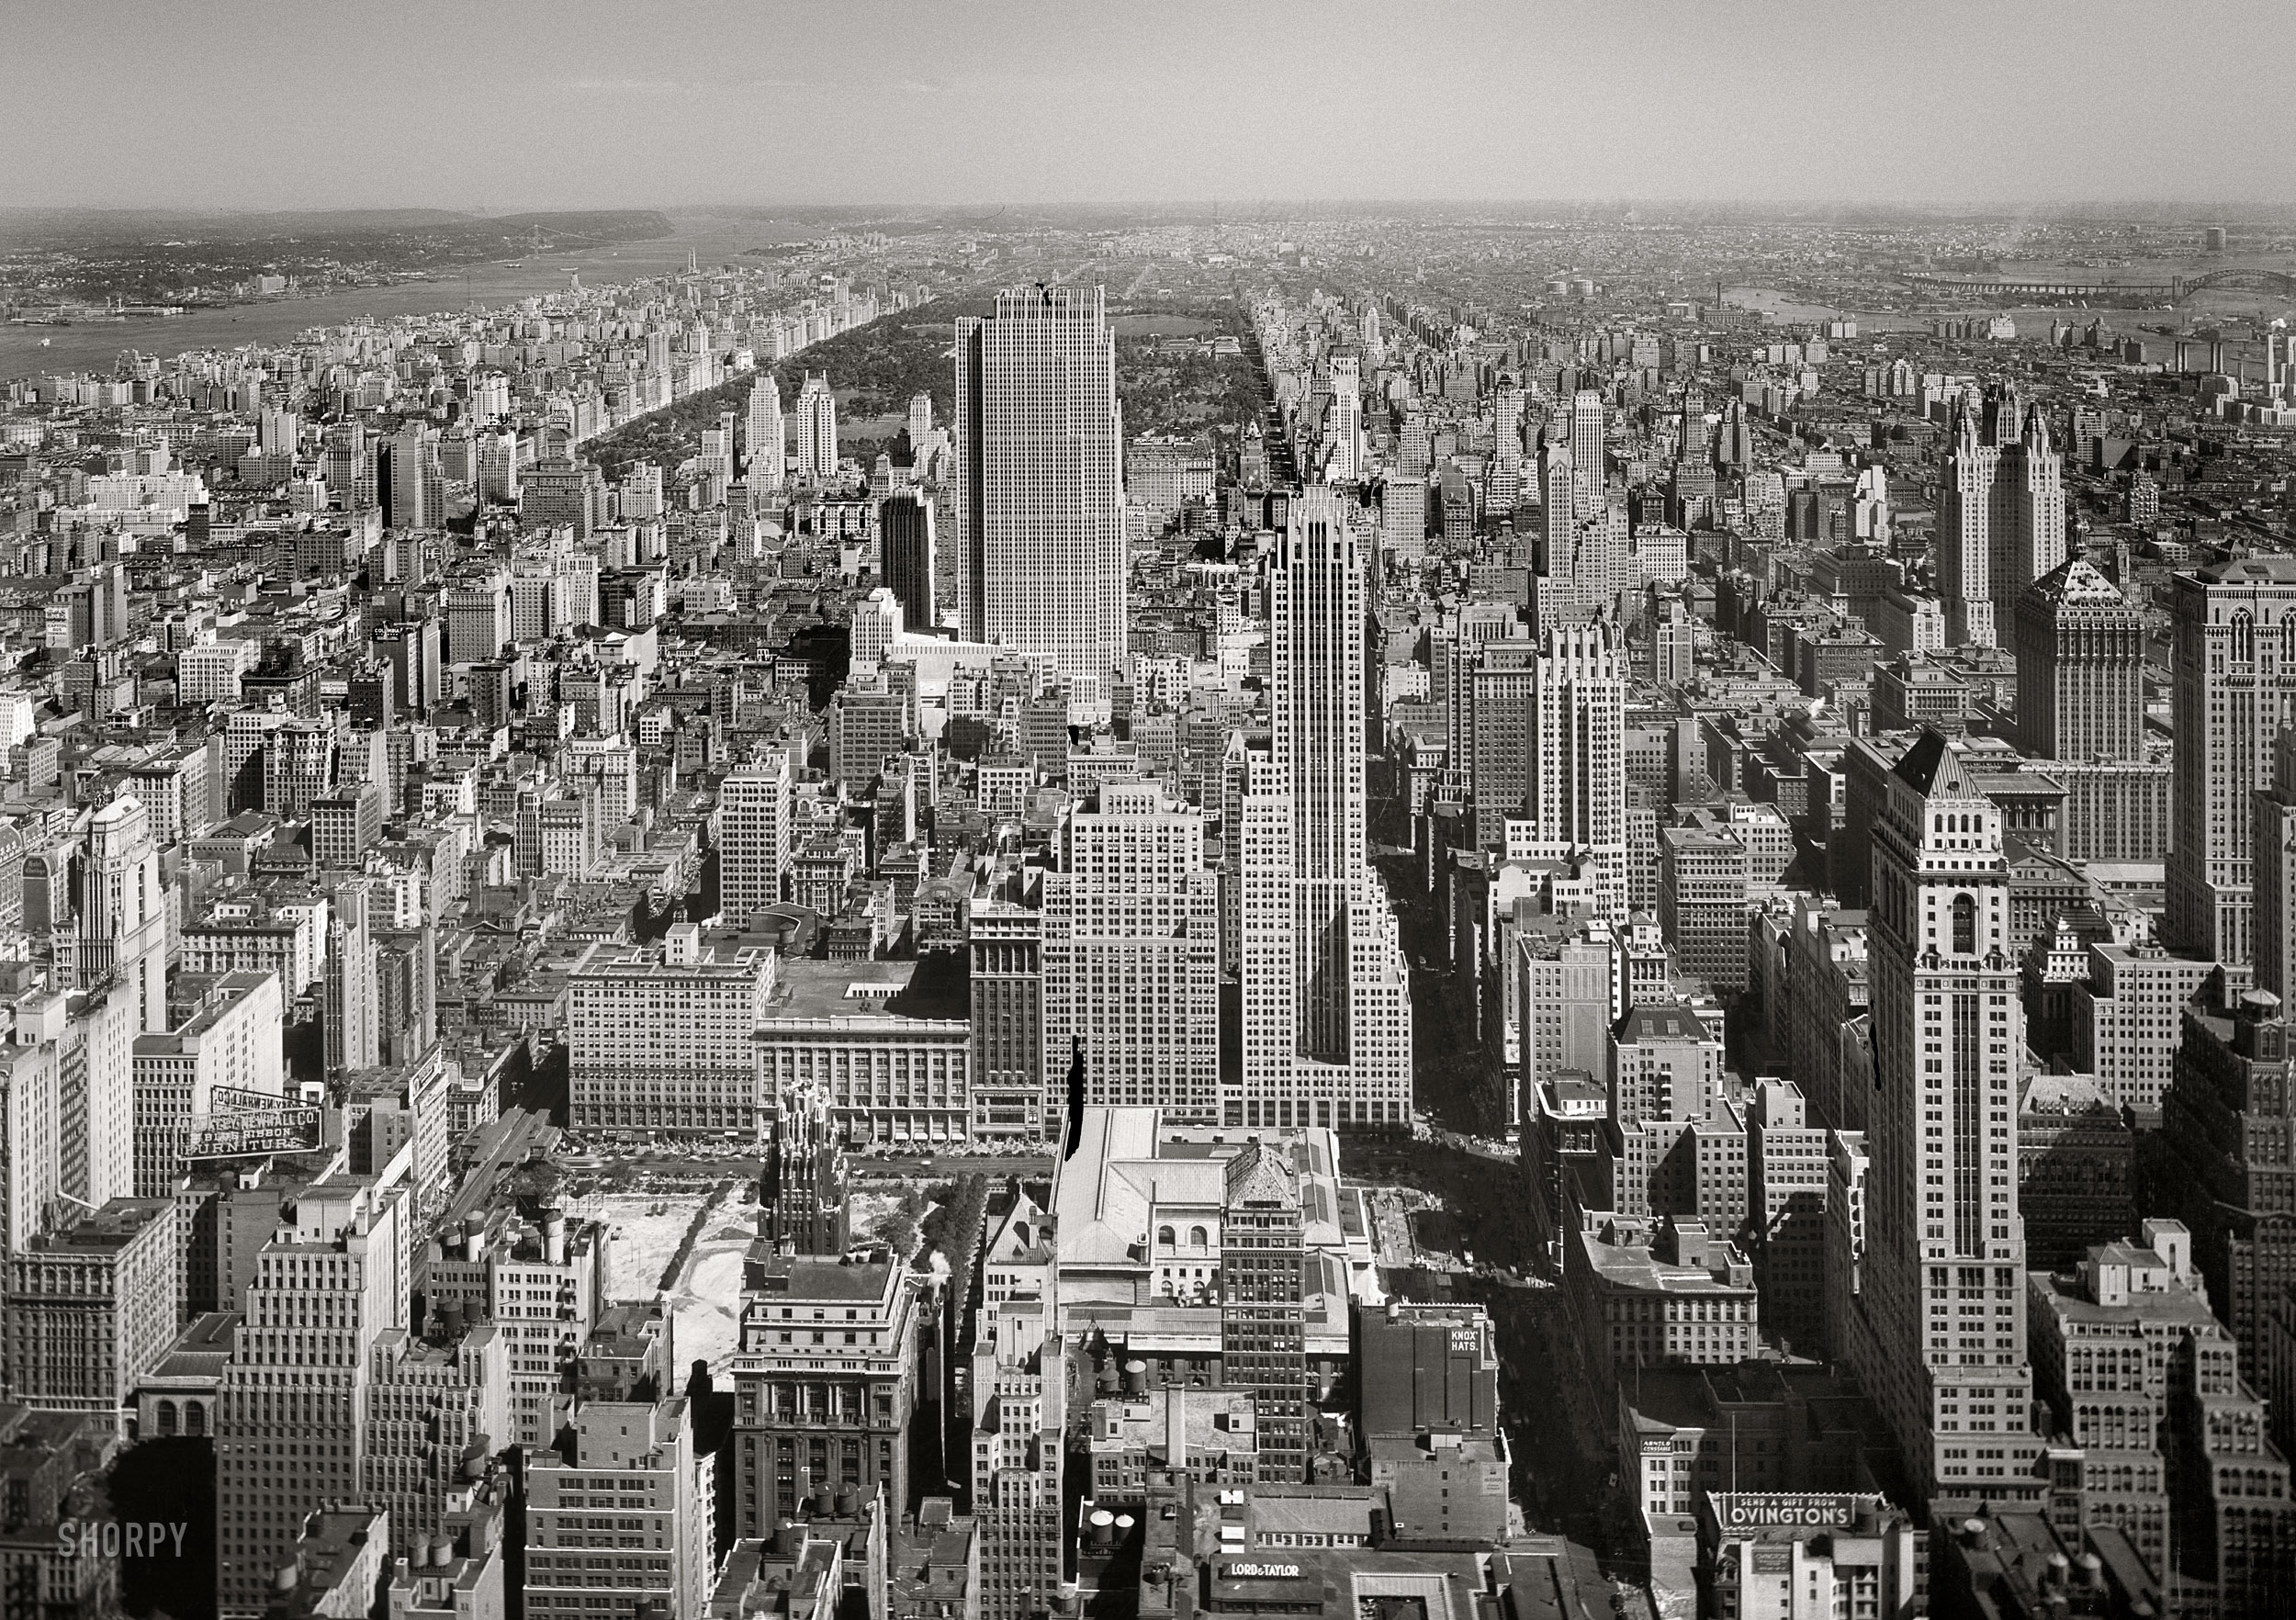 September 11, 1933. "New York City views. Looking north from the Empire State Building." 5x7 safety negative by Gottscho-Schleisner. View full size.
